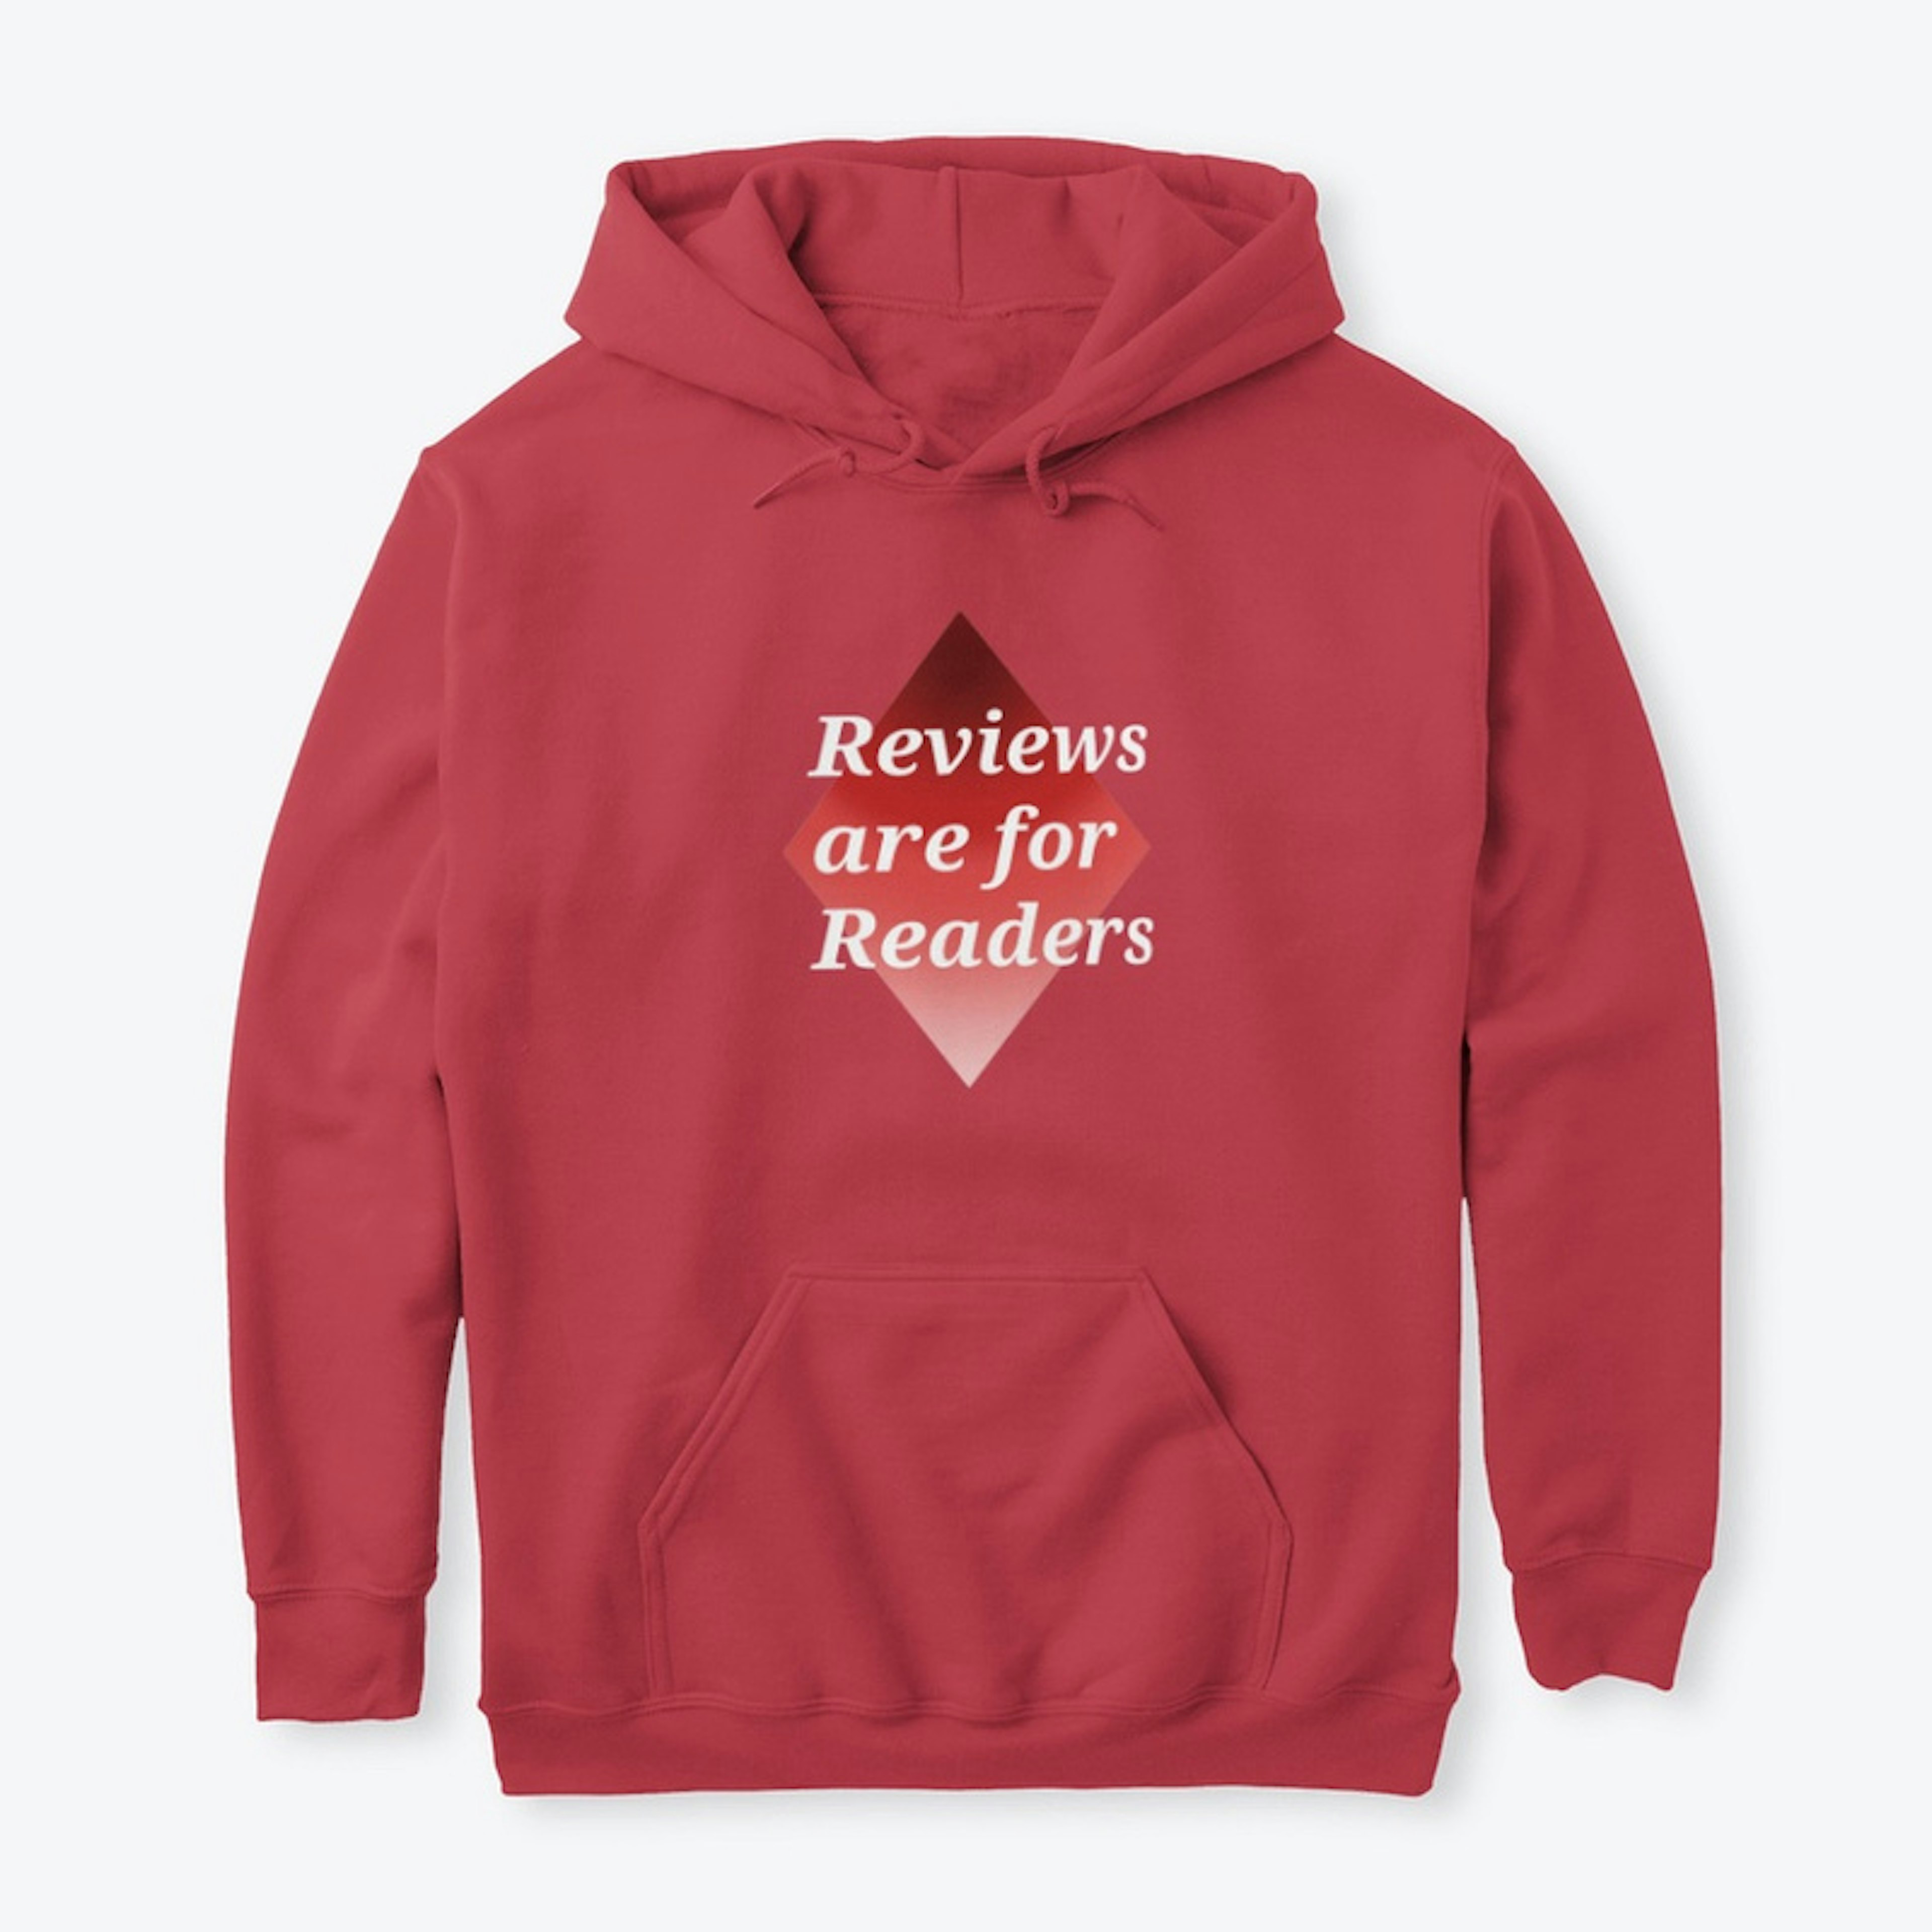 Reviews are for readers